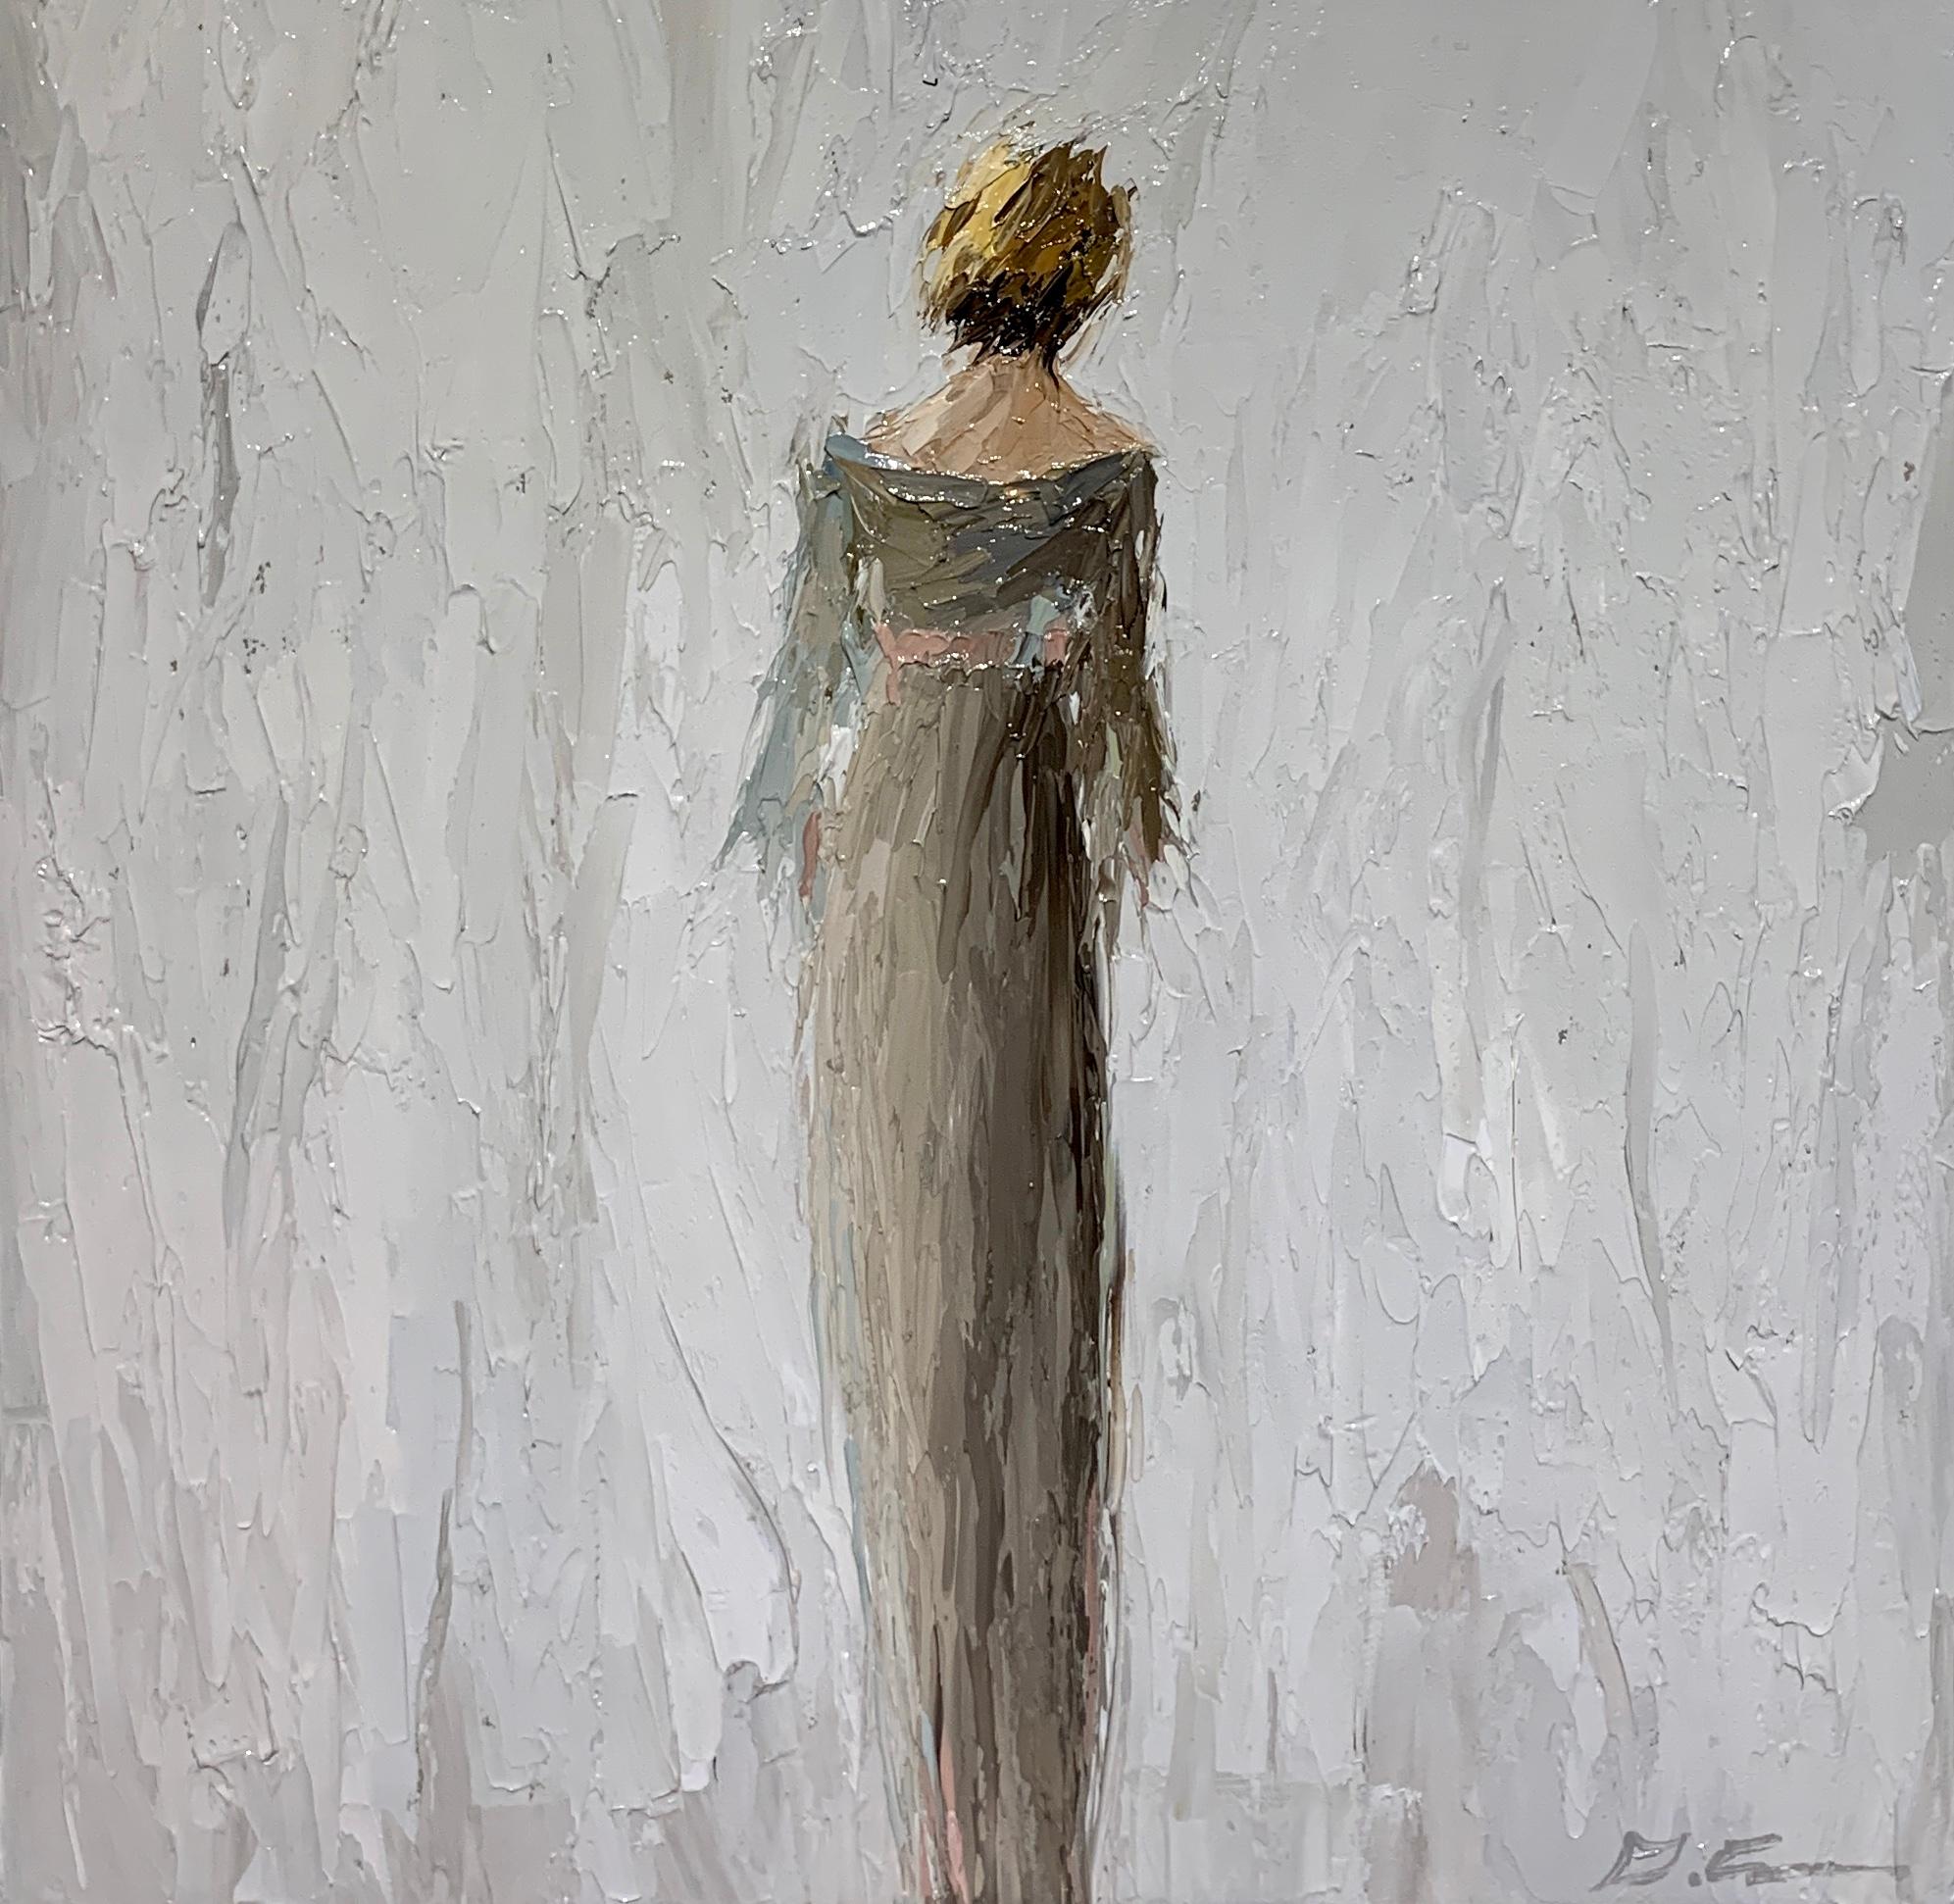 'Adele', is a small framed American Impressionist oil on canvas painting of square format created by Geri Eubanks in 2019. The painting features a blond-hair lady depicted from the back, walking away from us. She is wearing a white dress uncovering